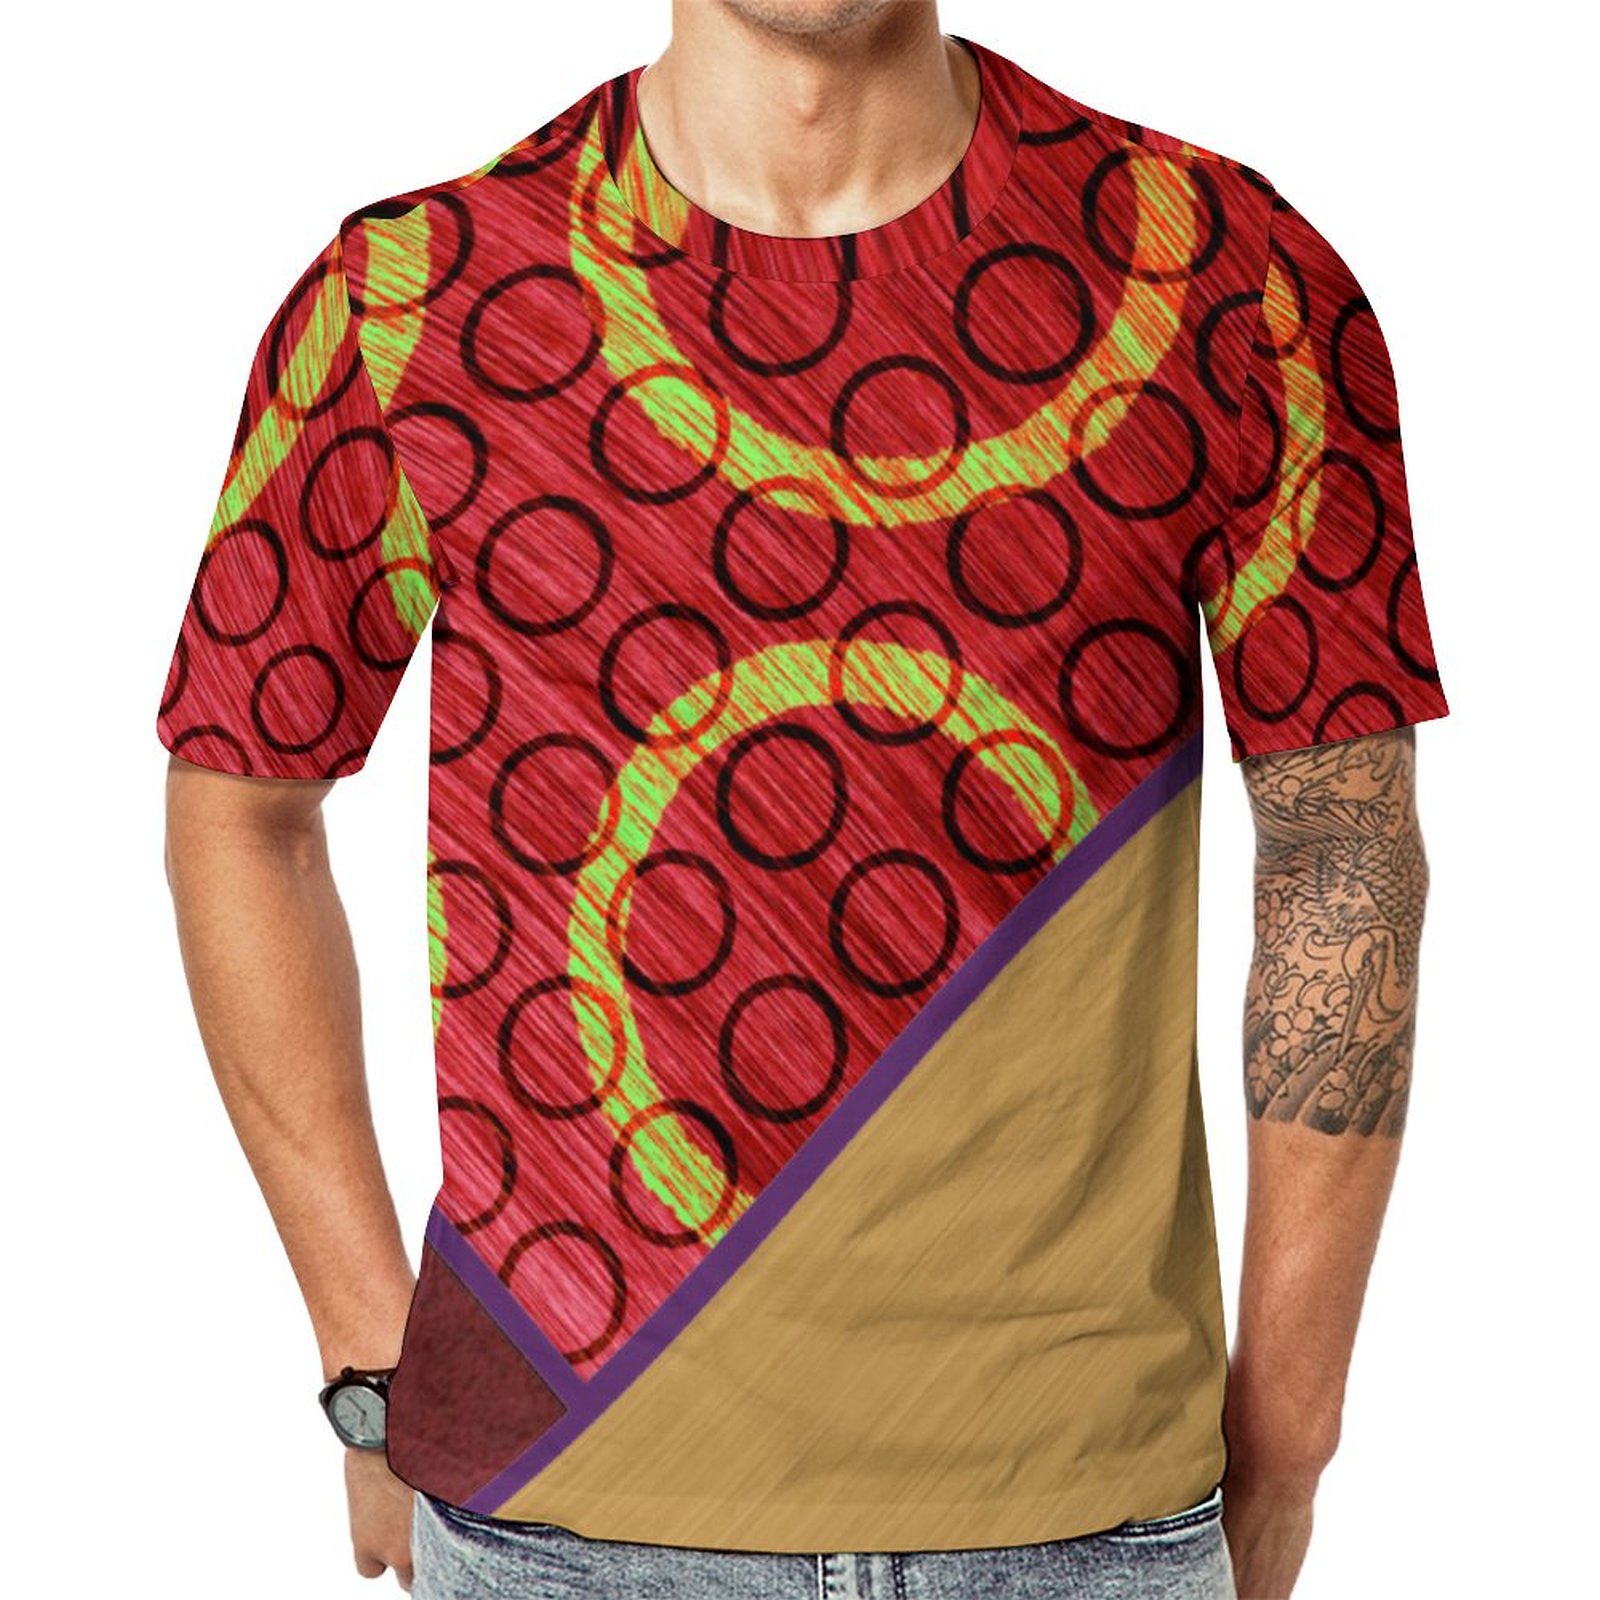 Abstract Gold Red Circle Geometric Short Sleeve Print Unisex Tshirt Summer Casual Tees for Men and Women Coolcoshirts